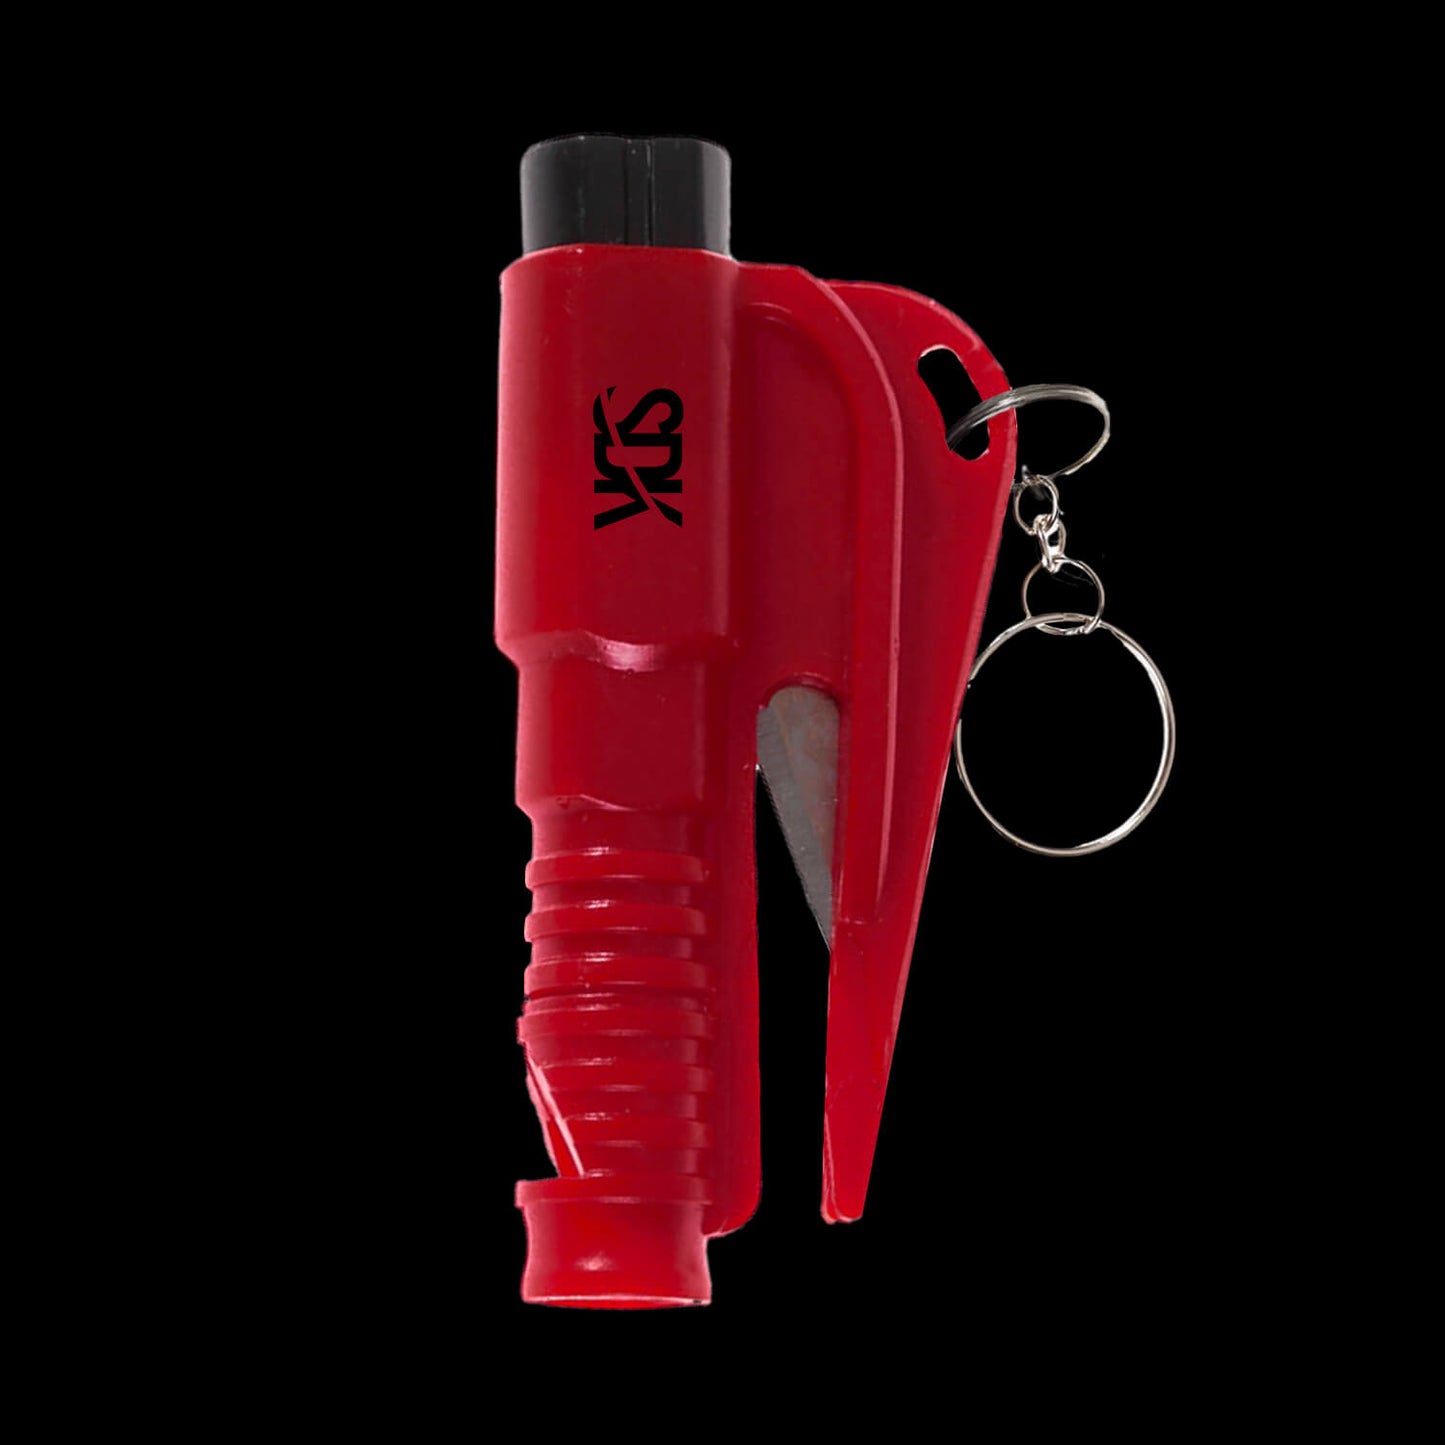 SDK Escape Tool Red (all-in-one seat belt cutter, window breaker and whistle)